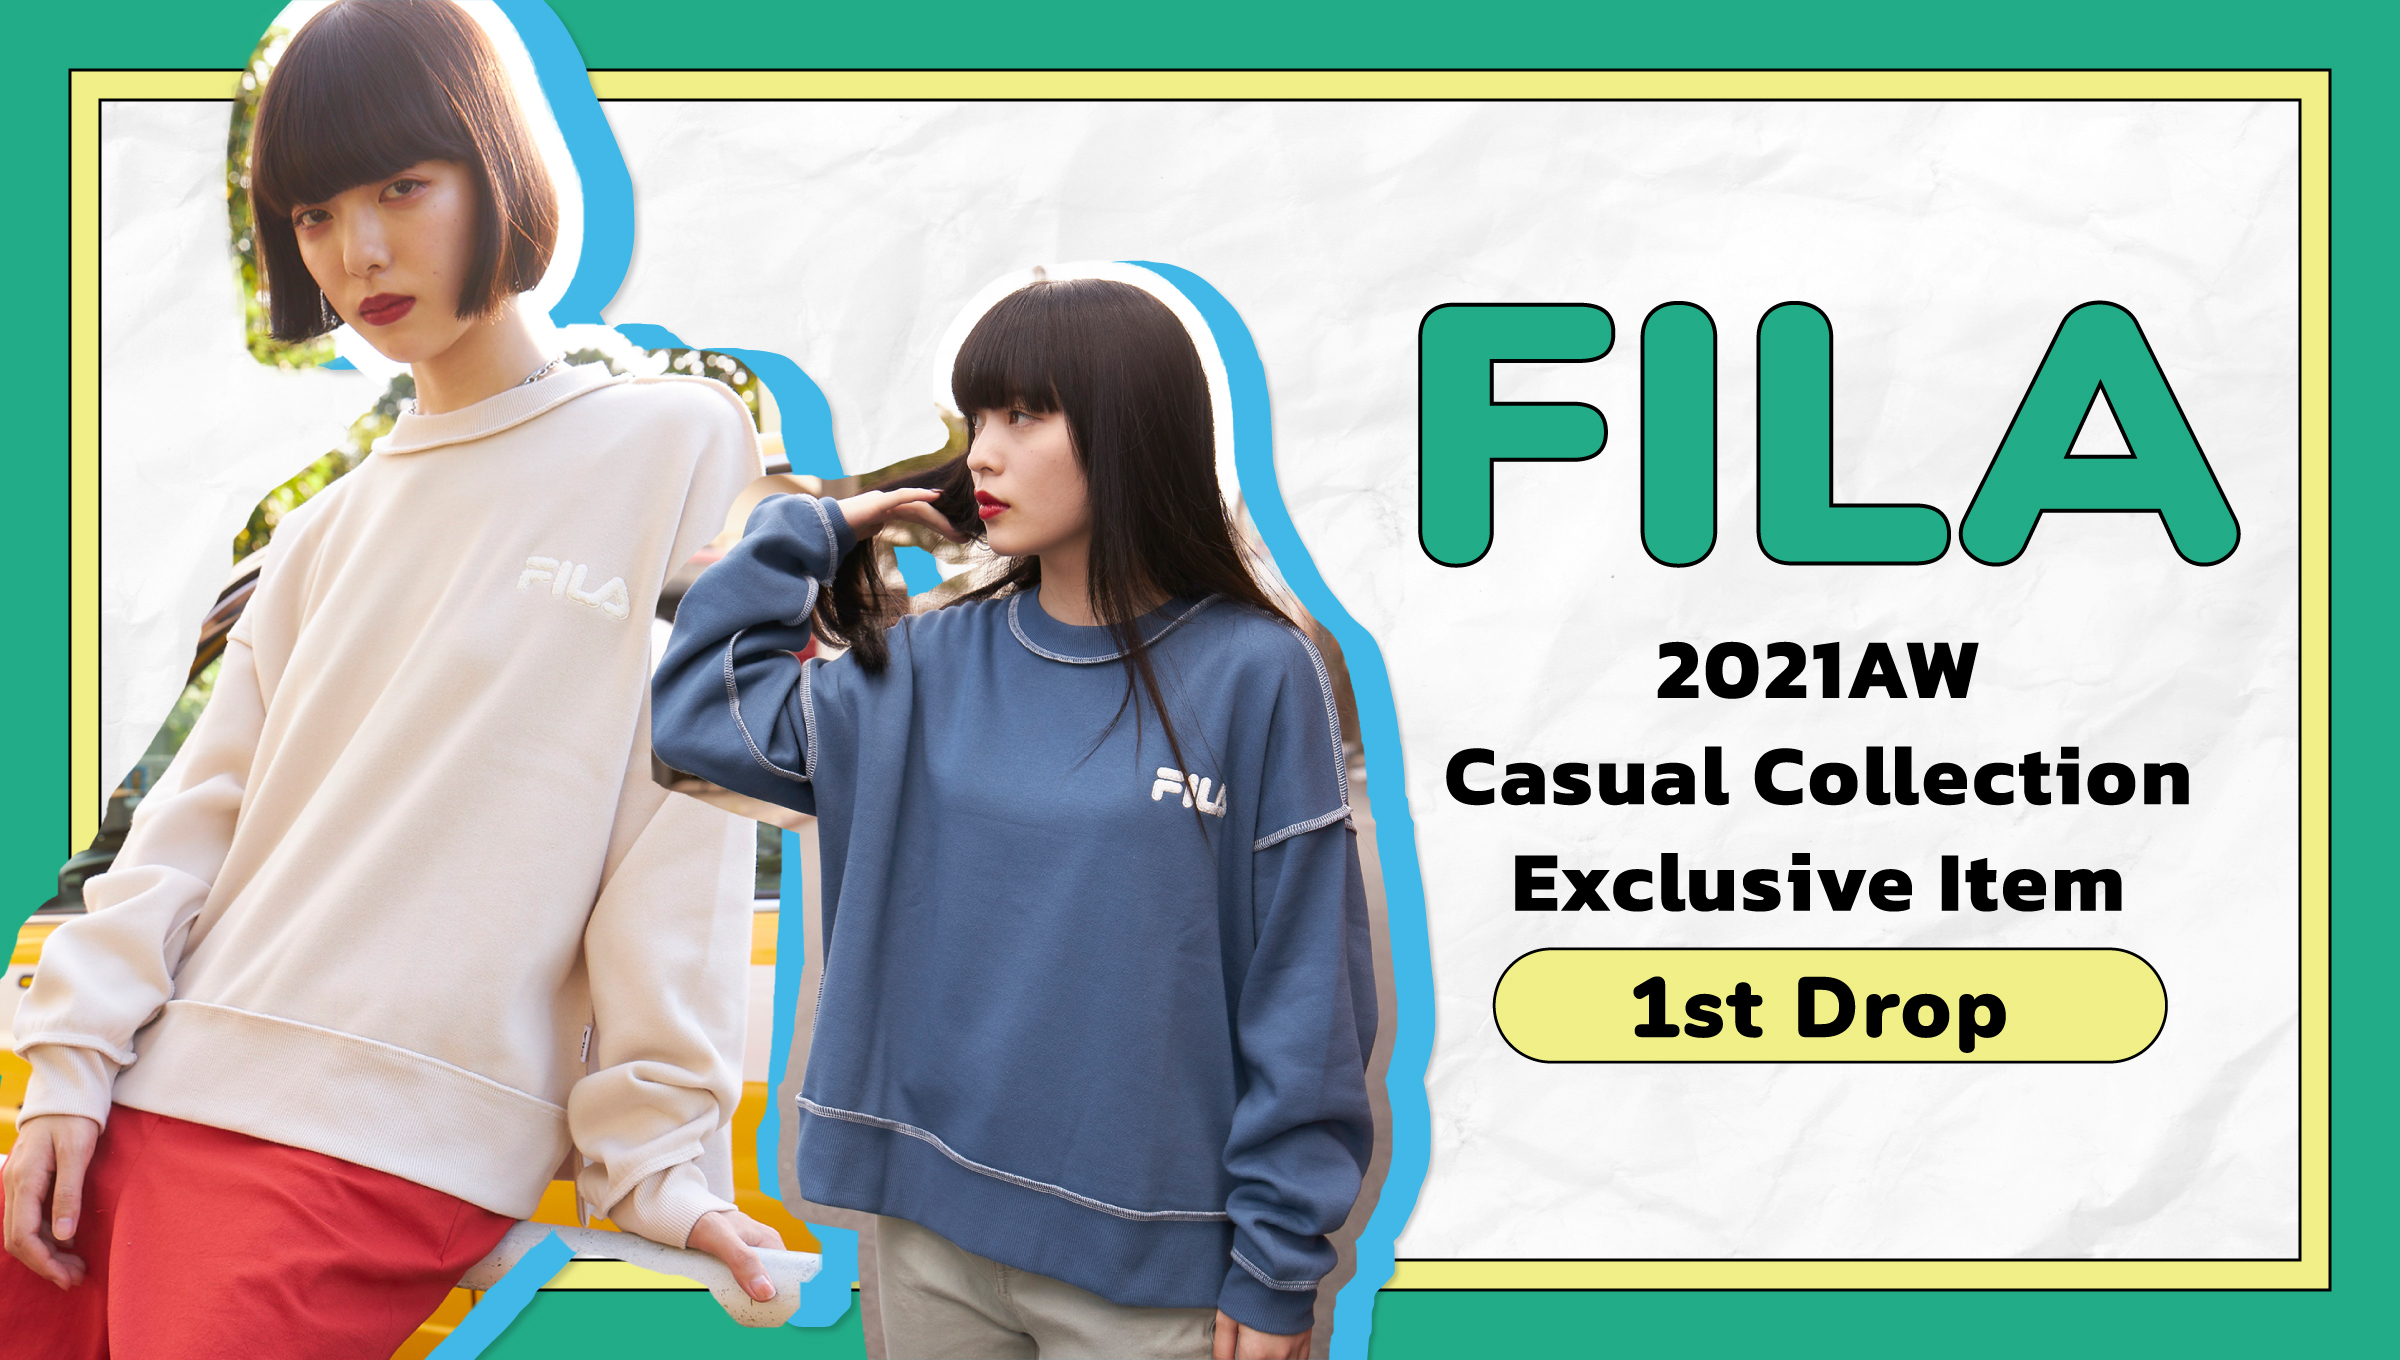 FILA 2021AW Casual COLLECTION EXCLUSIVE ITEM - 1st Drop -